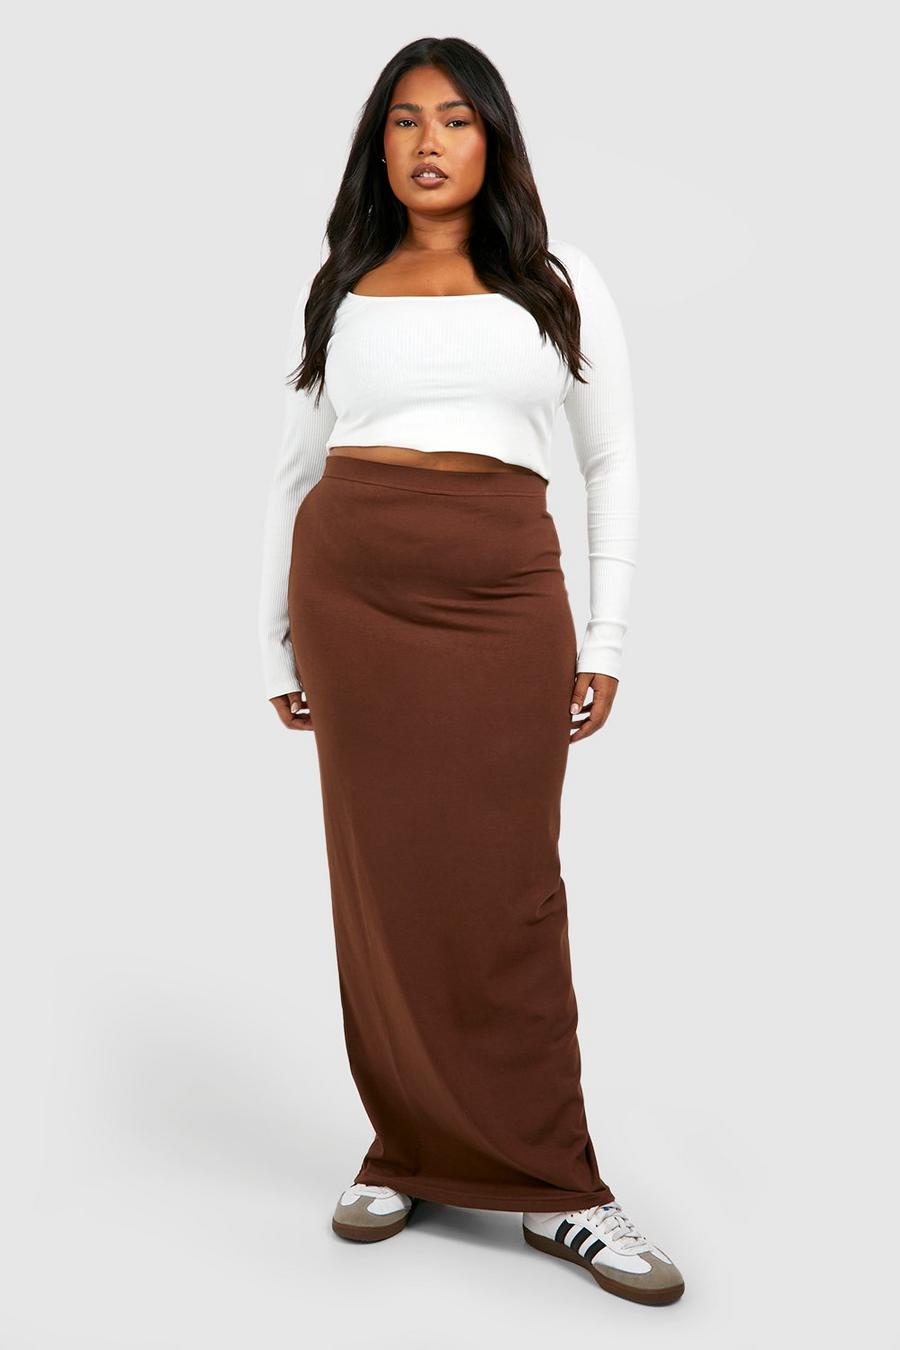 Cheap Plus Size Clothes Under 10 Dollars - Free Shipping And